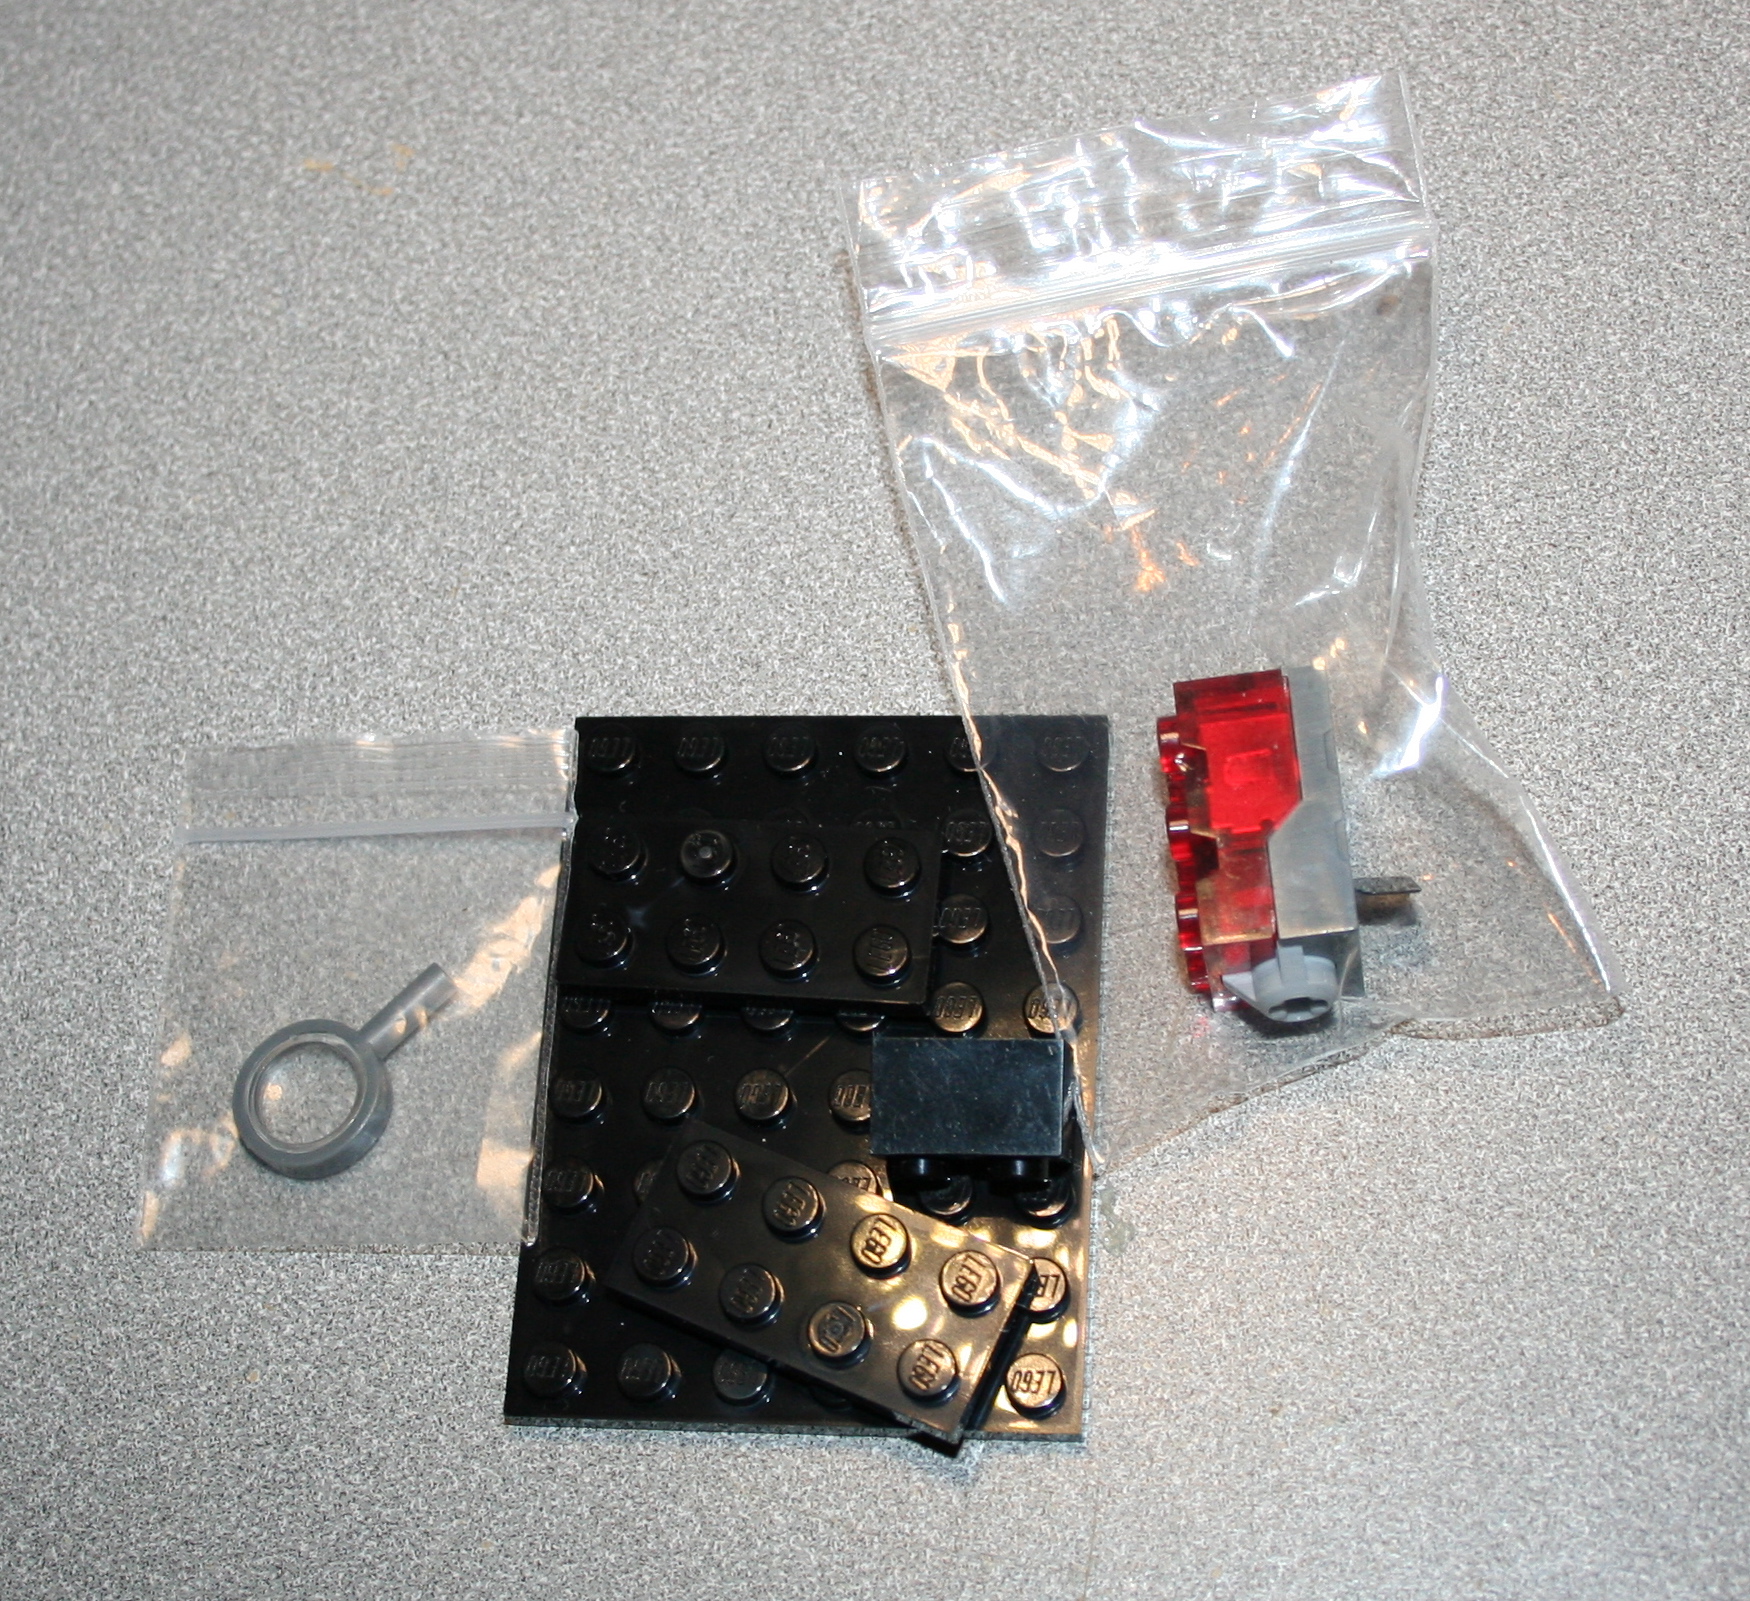 Items are shown for the parts kit to match LEGO Optics, Chapter 1.